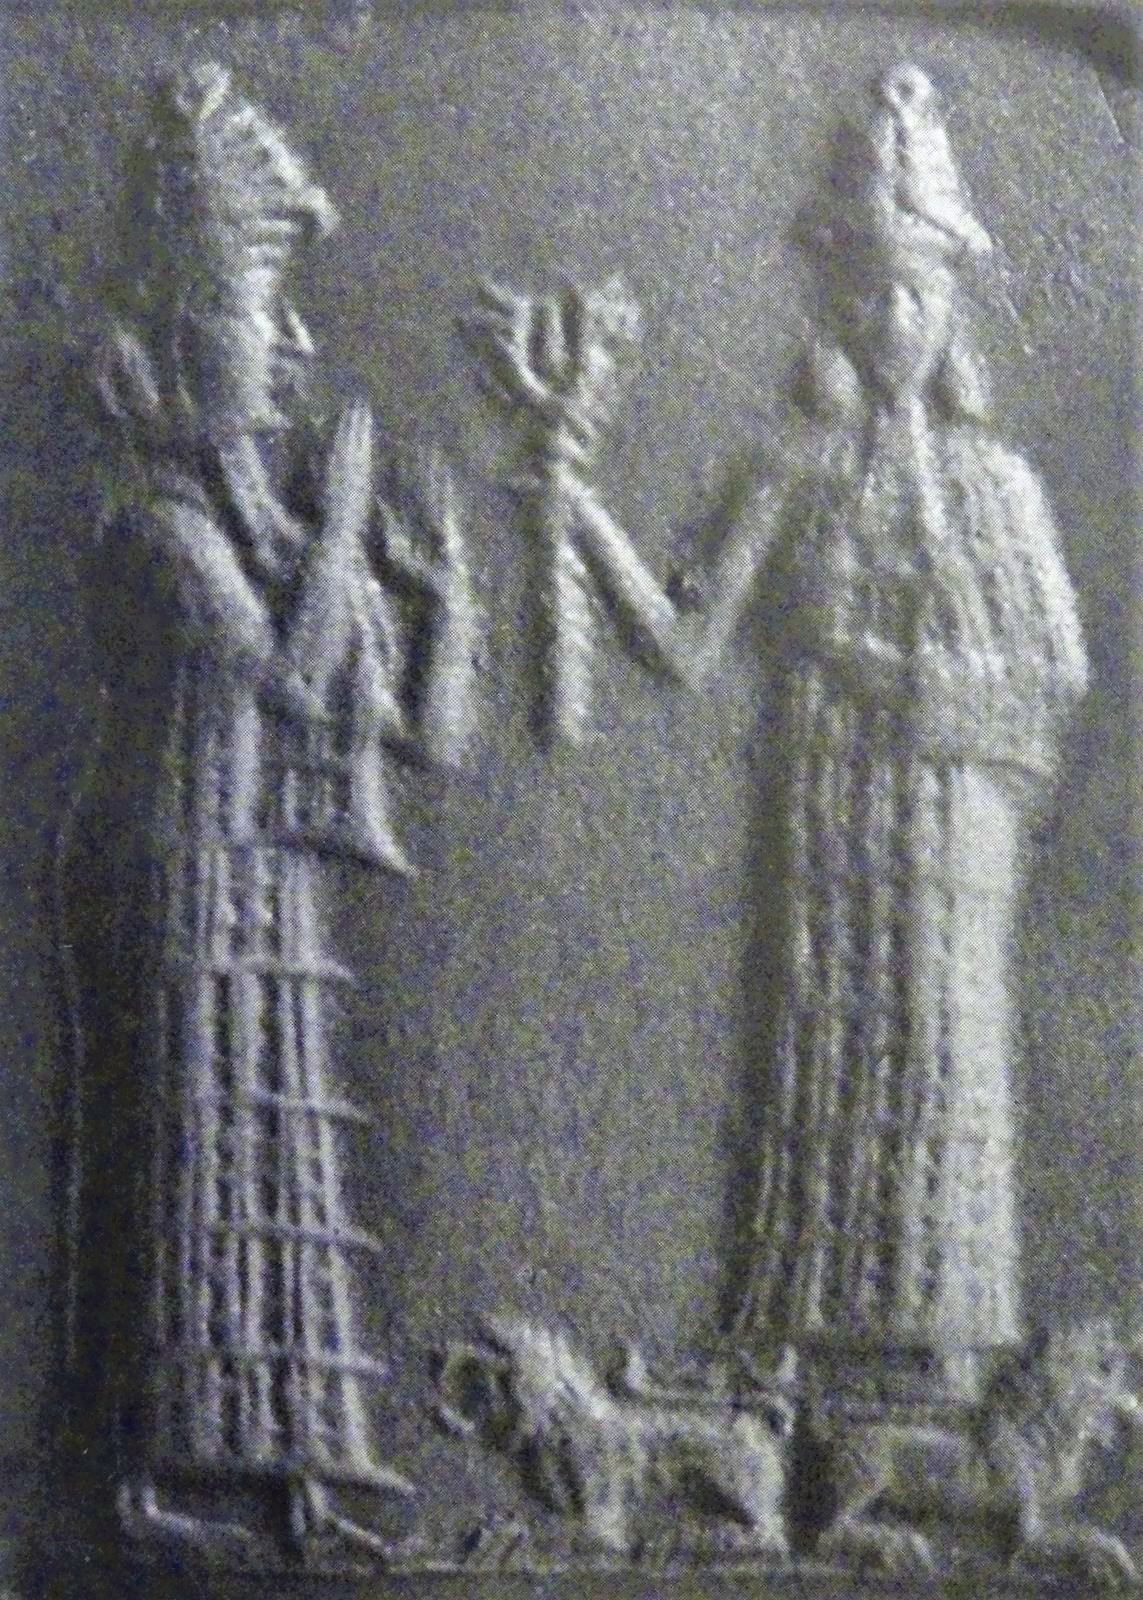 4 - Ninsun & daughter-in-law by way of many son-kings, Inanna